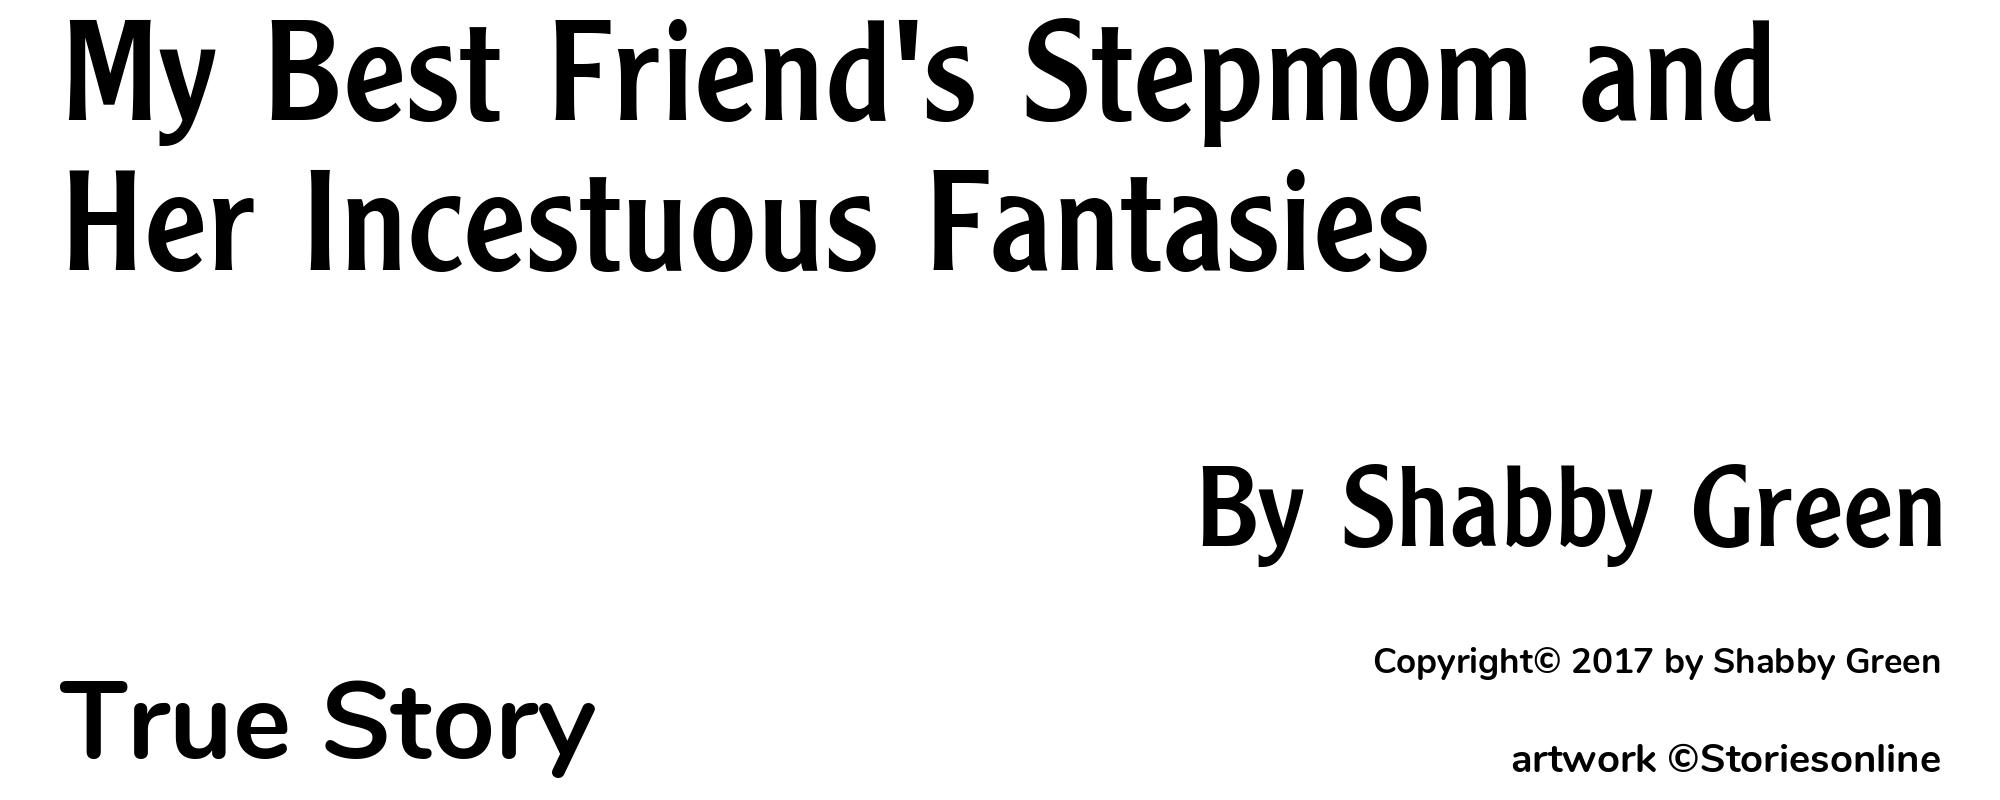 My Best Friend's Stepmom and Her Incestuous Fantasies - Cover